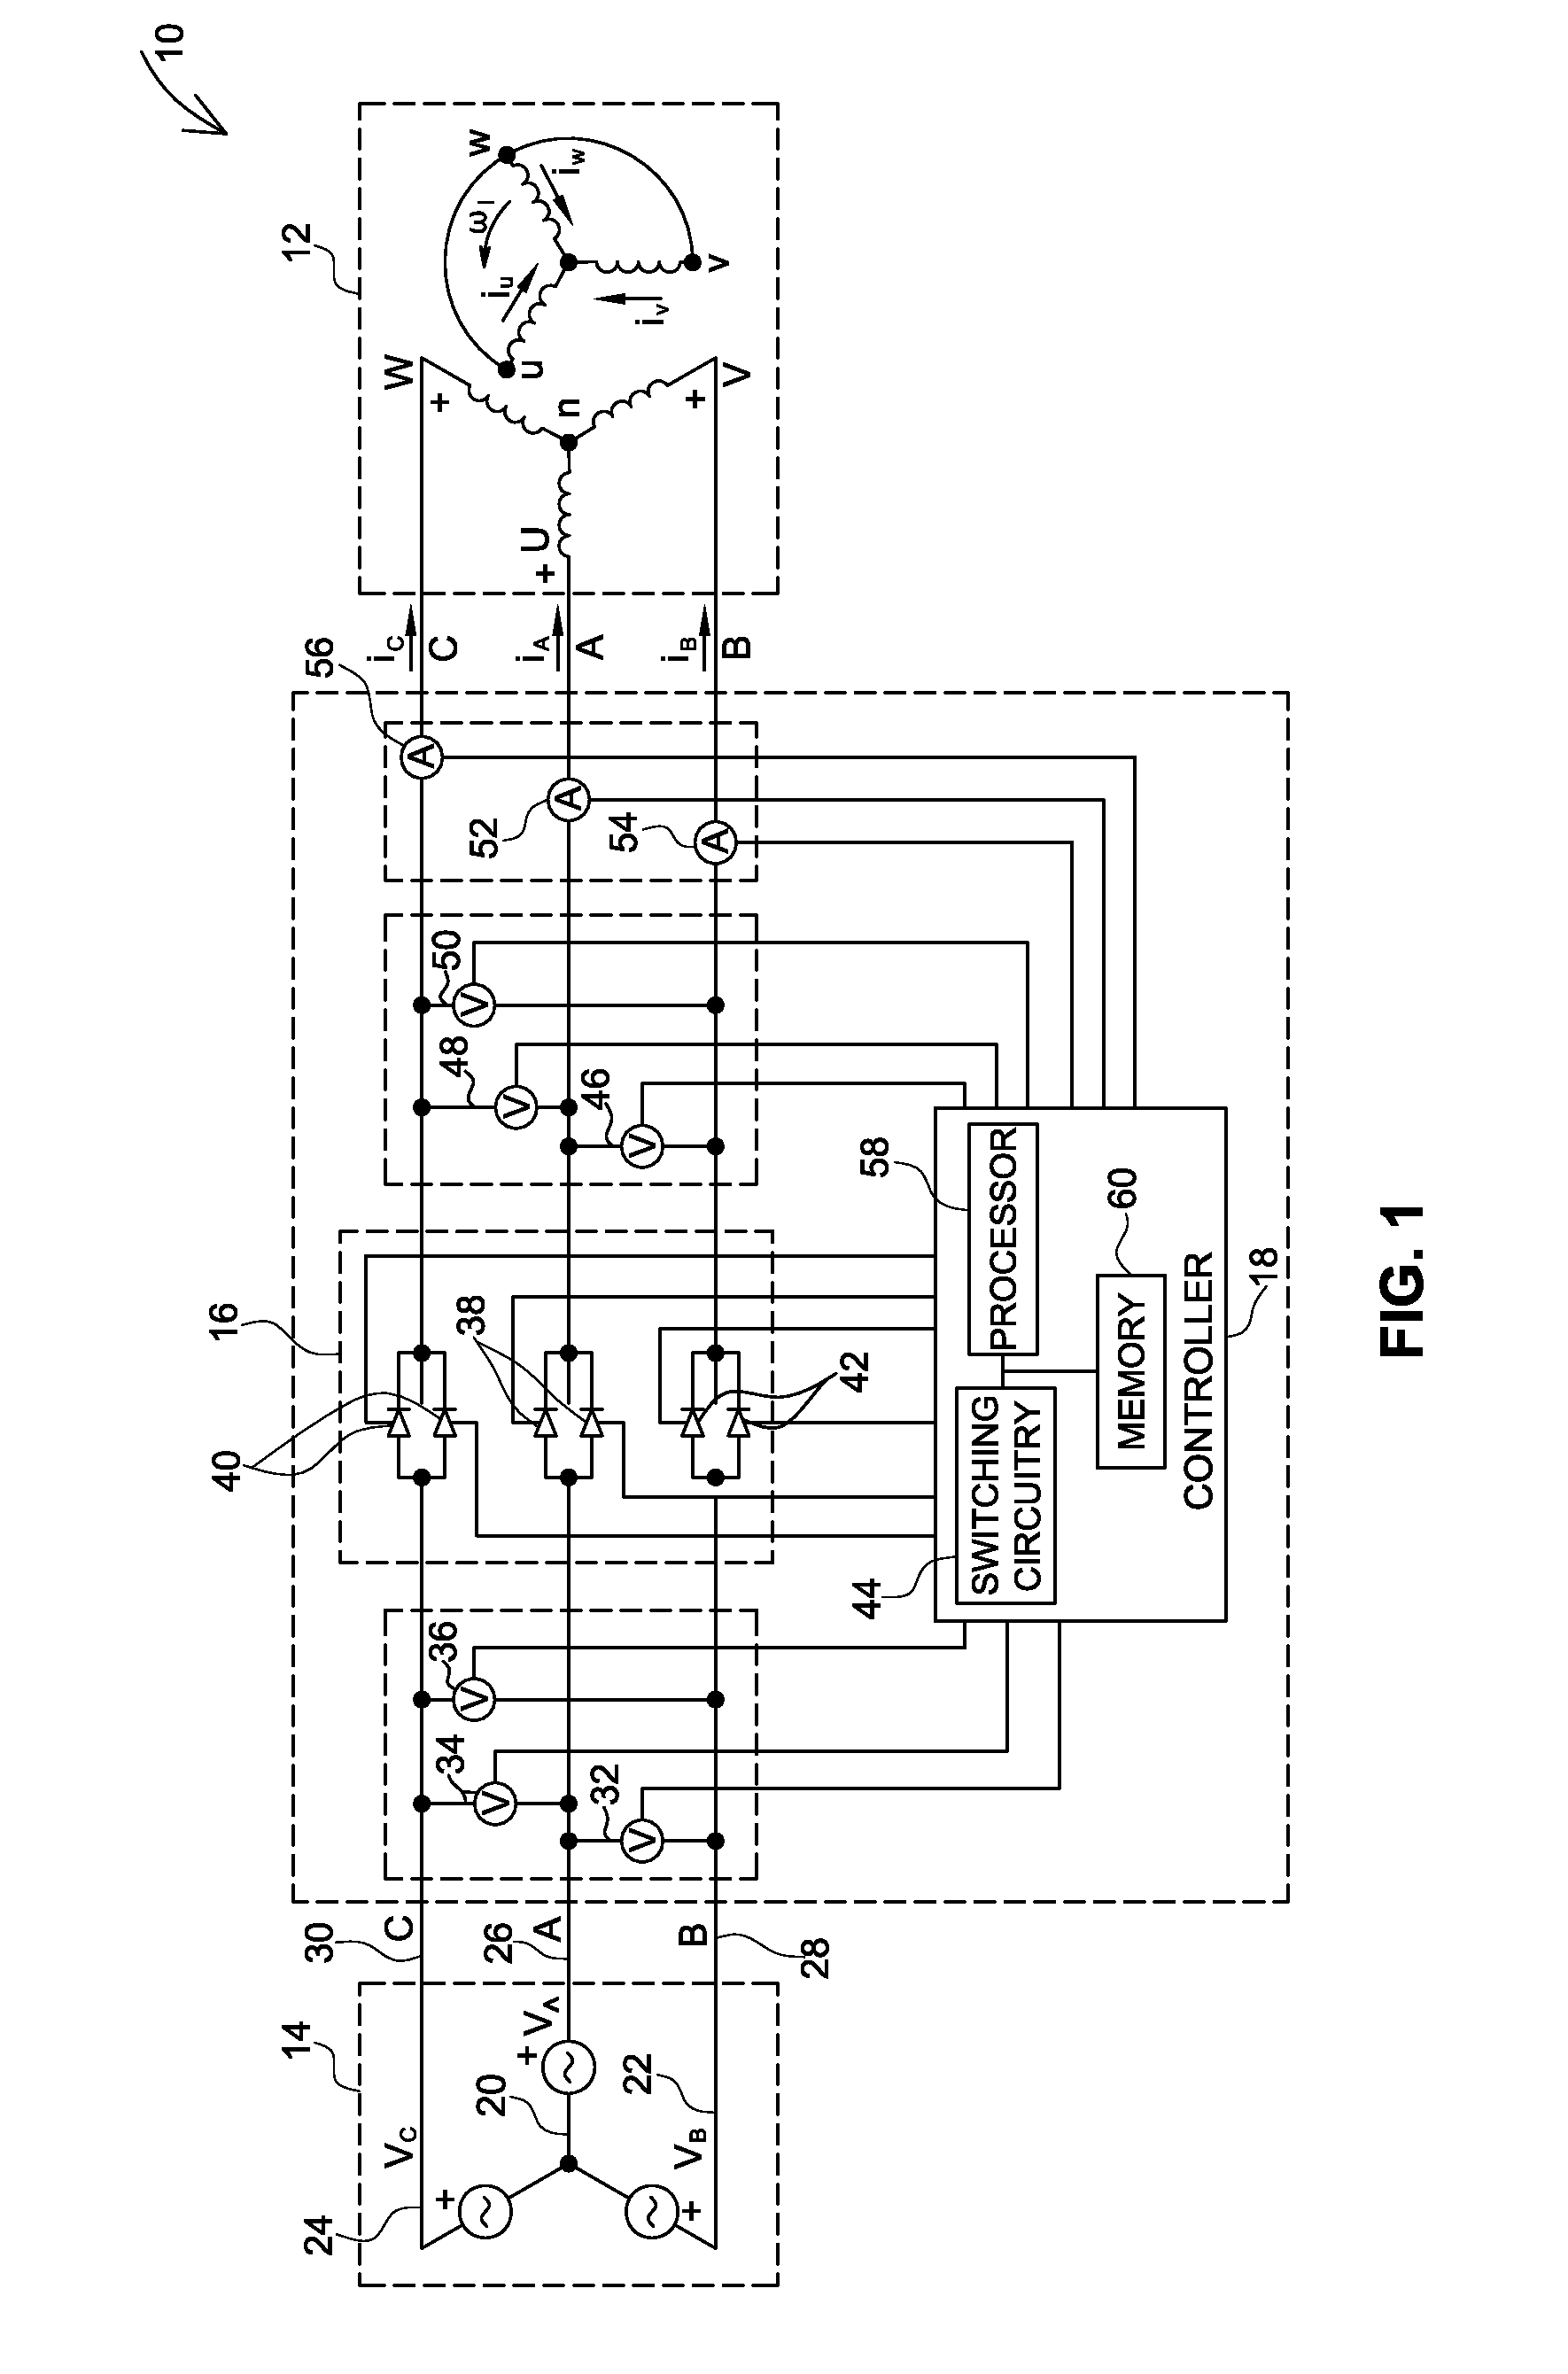 Parameter estimation system and method for an induction motor